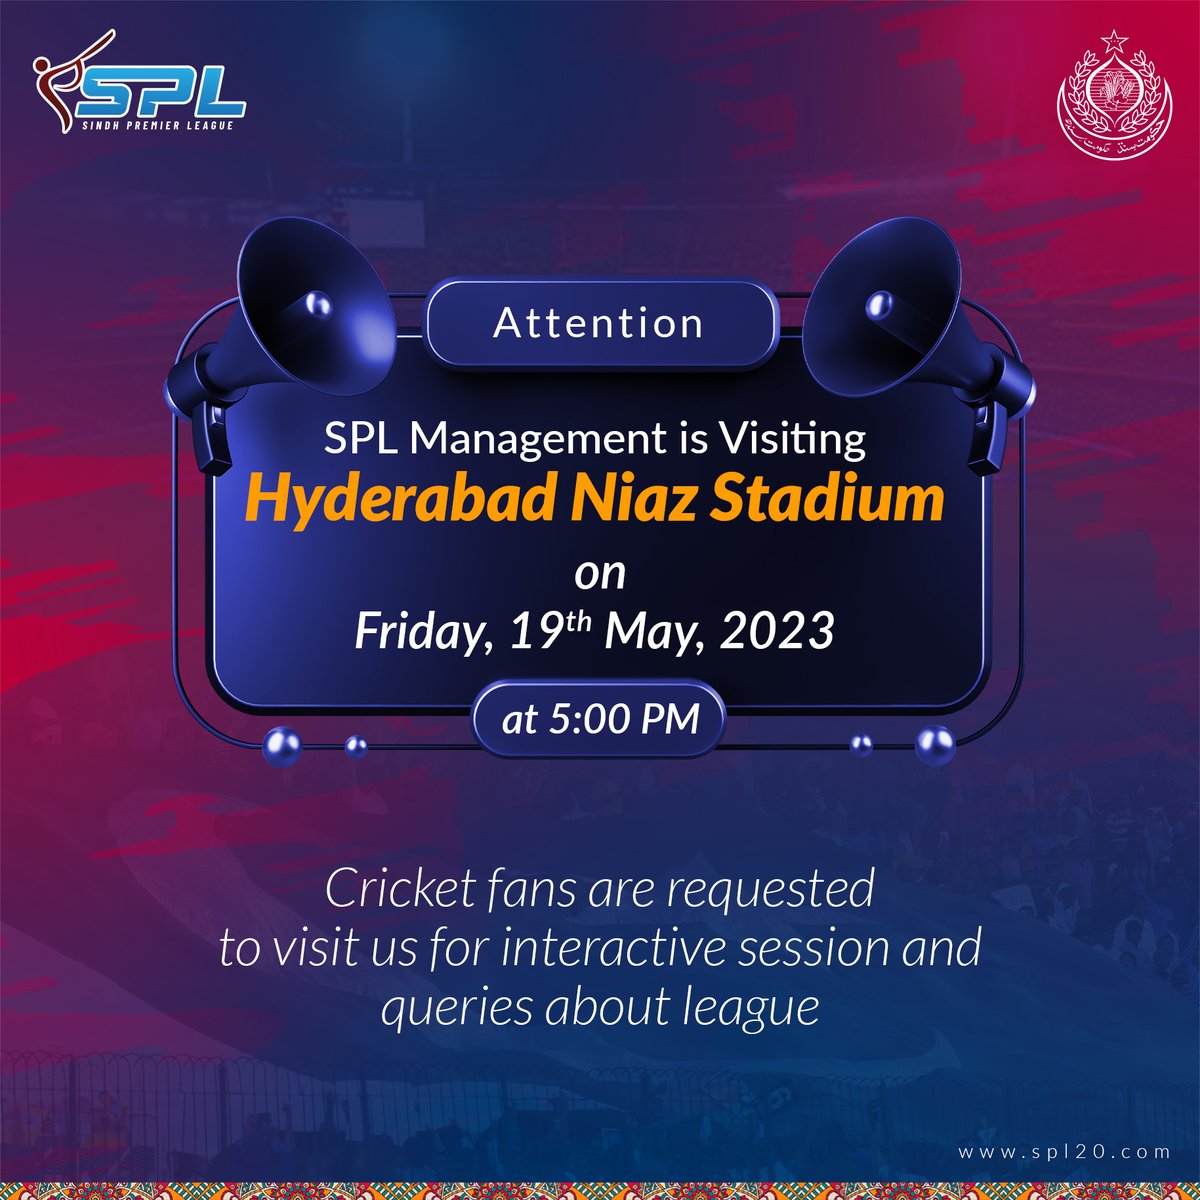 📢 Attention

Cricket 🏏 fans of Hyderabad, we are waiting to see you there 👀

#spl #sindhpremierleague #T20 #SPLseason1